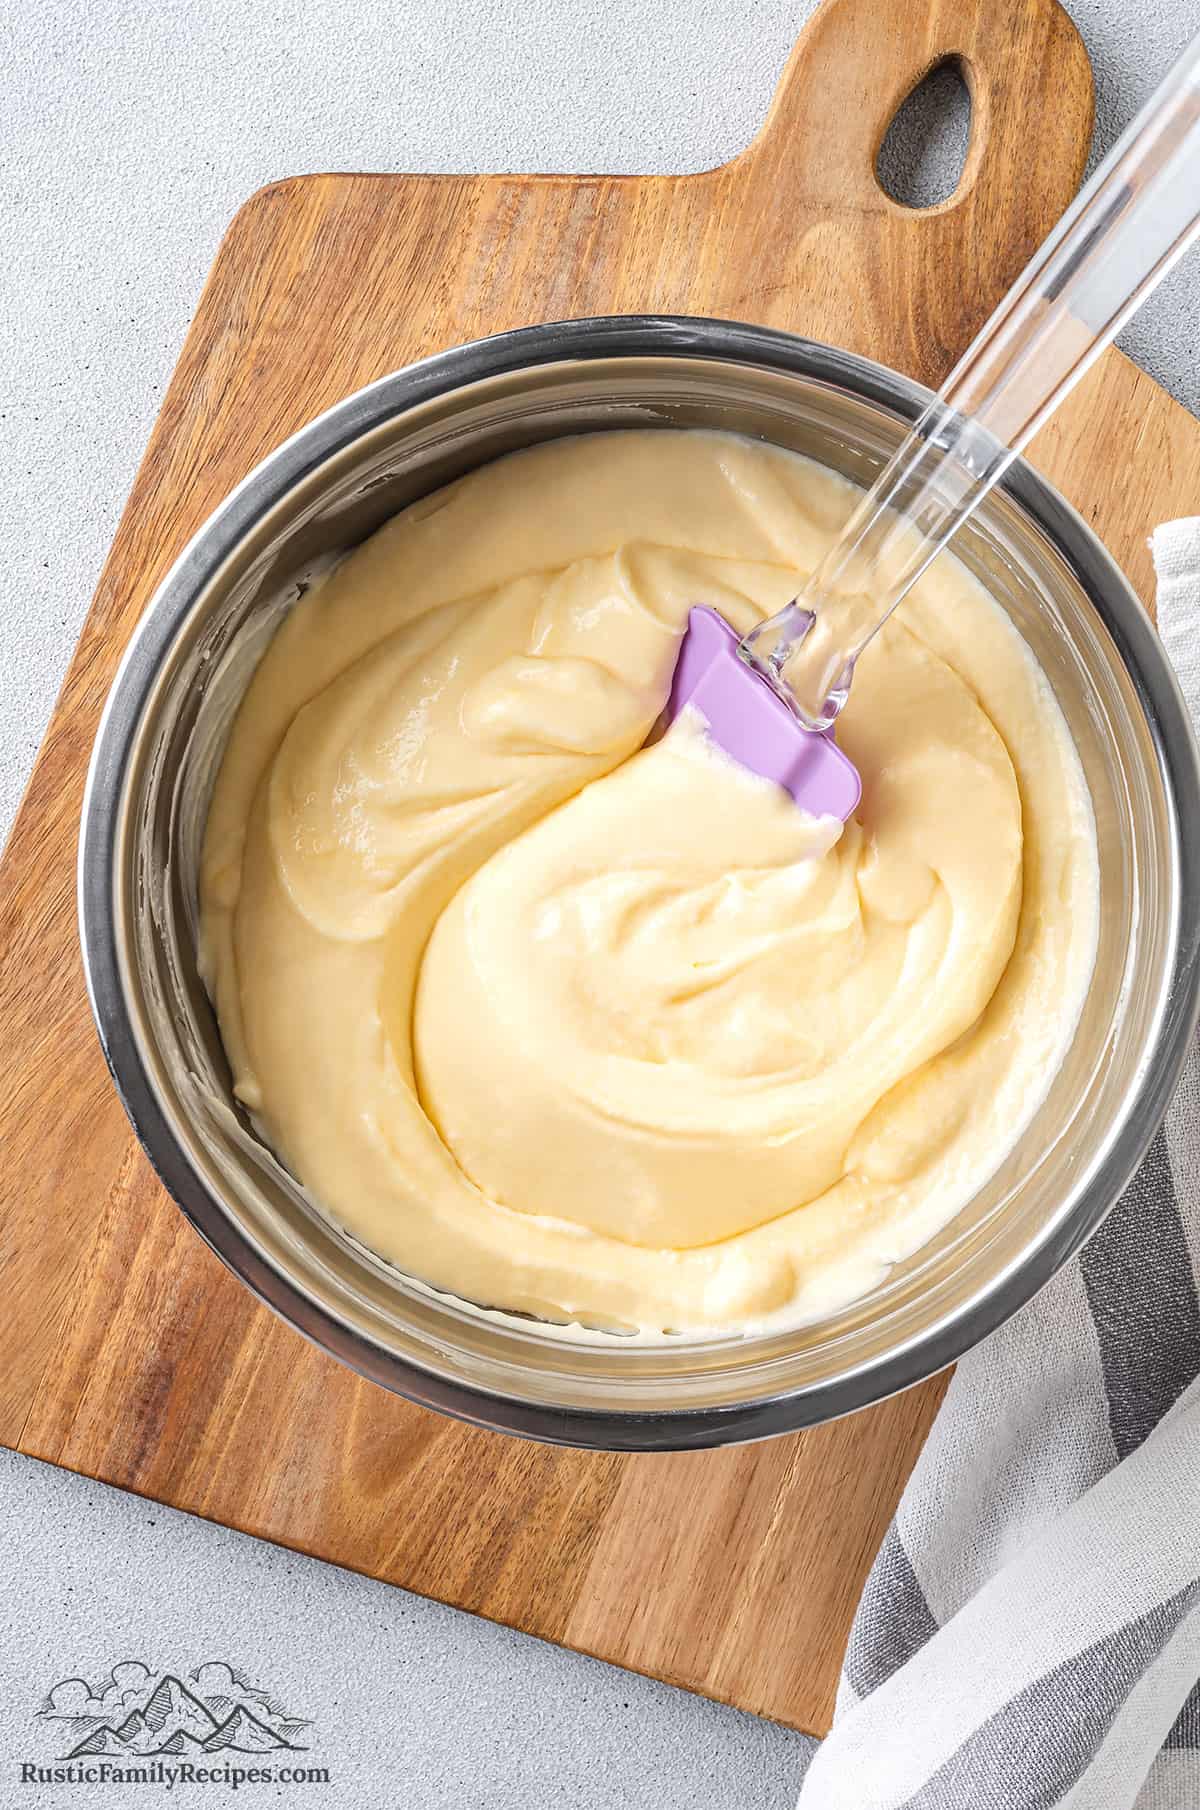 Diplomat cream in a bowl with a spatula